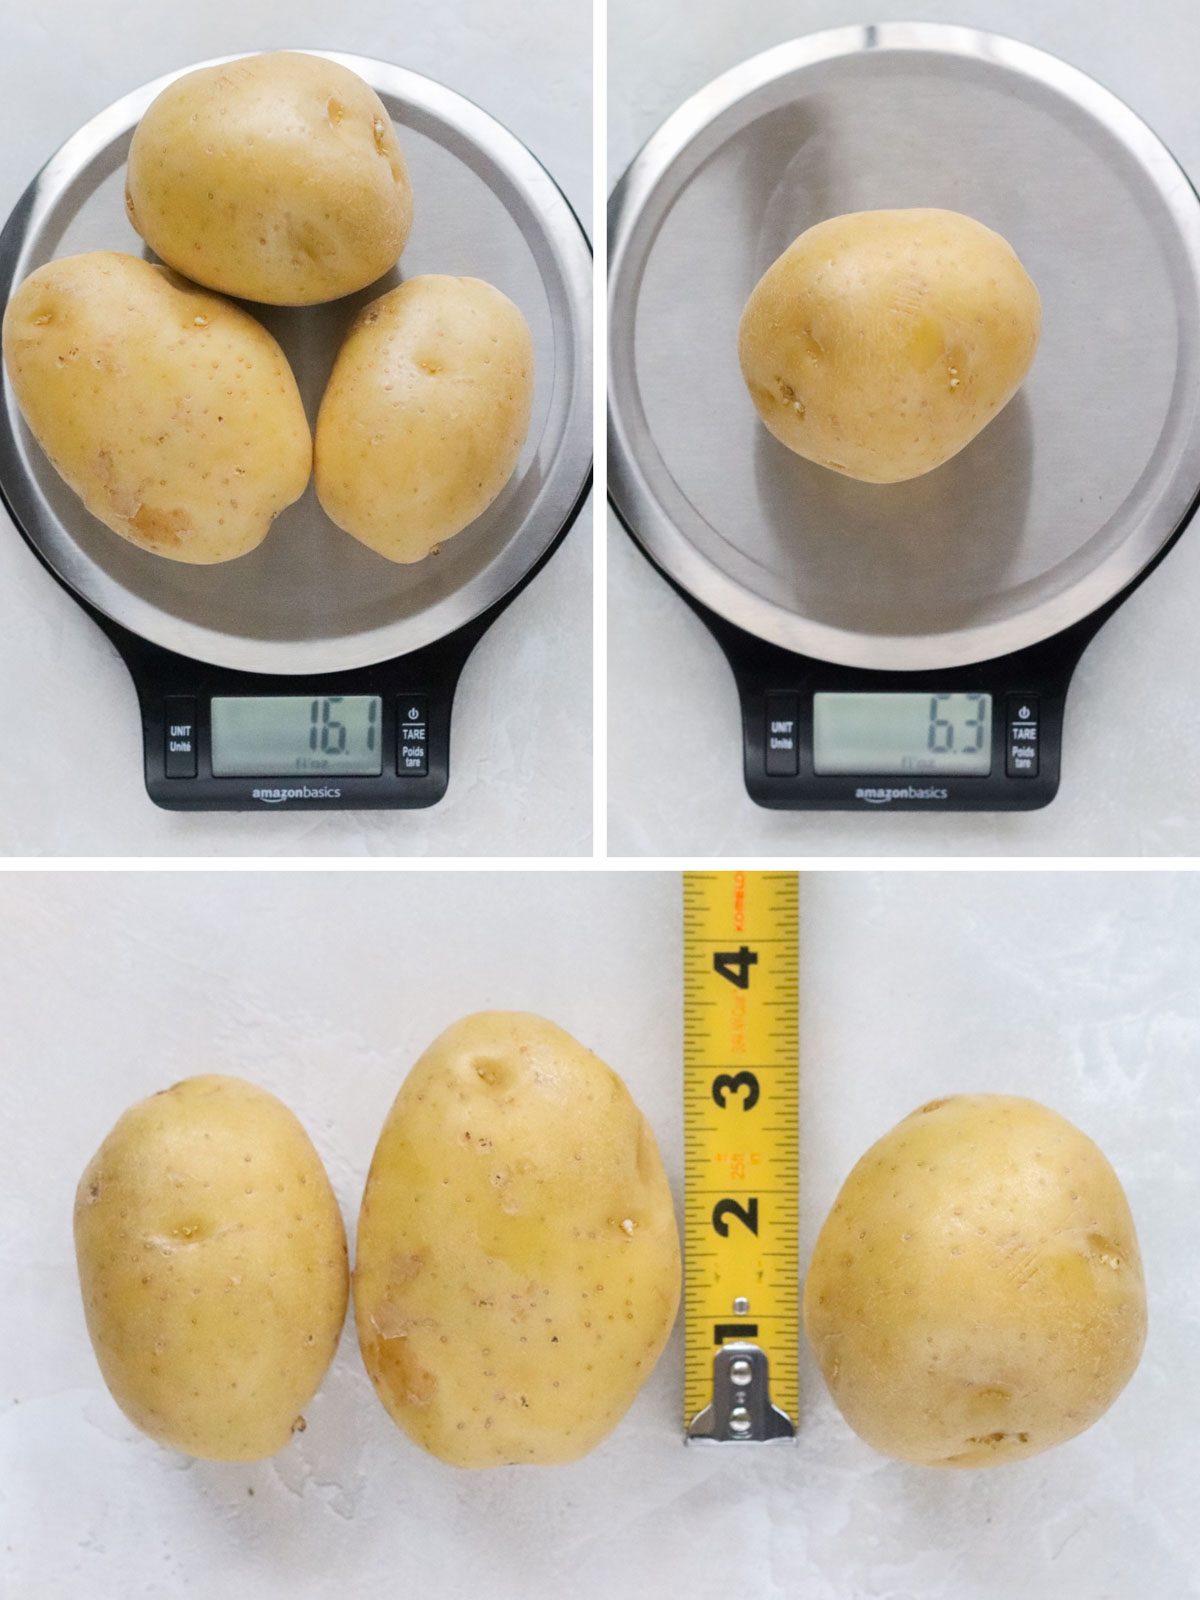 collage with 3 yellow potatoes on a scale that reads 16.1 ounces, one yellow potato on a scale that reads 6.3 ounces, and the 3 potatoes next to a measuring tape